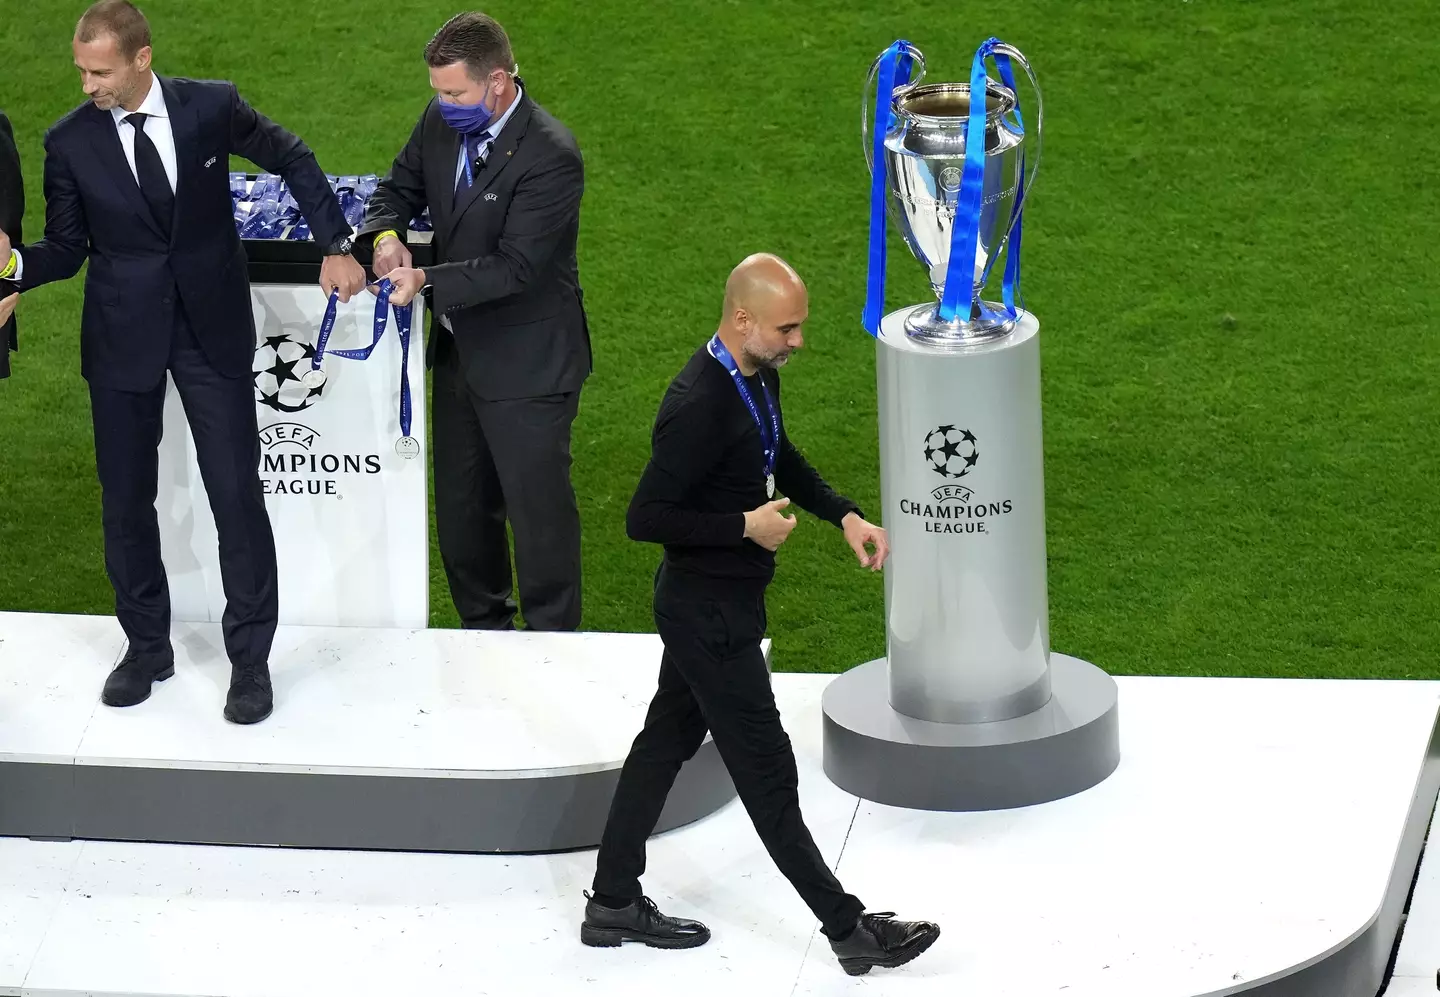 It's been 11 years since Guardiola won the Champions League. Image: Alamy